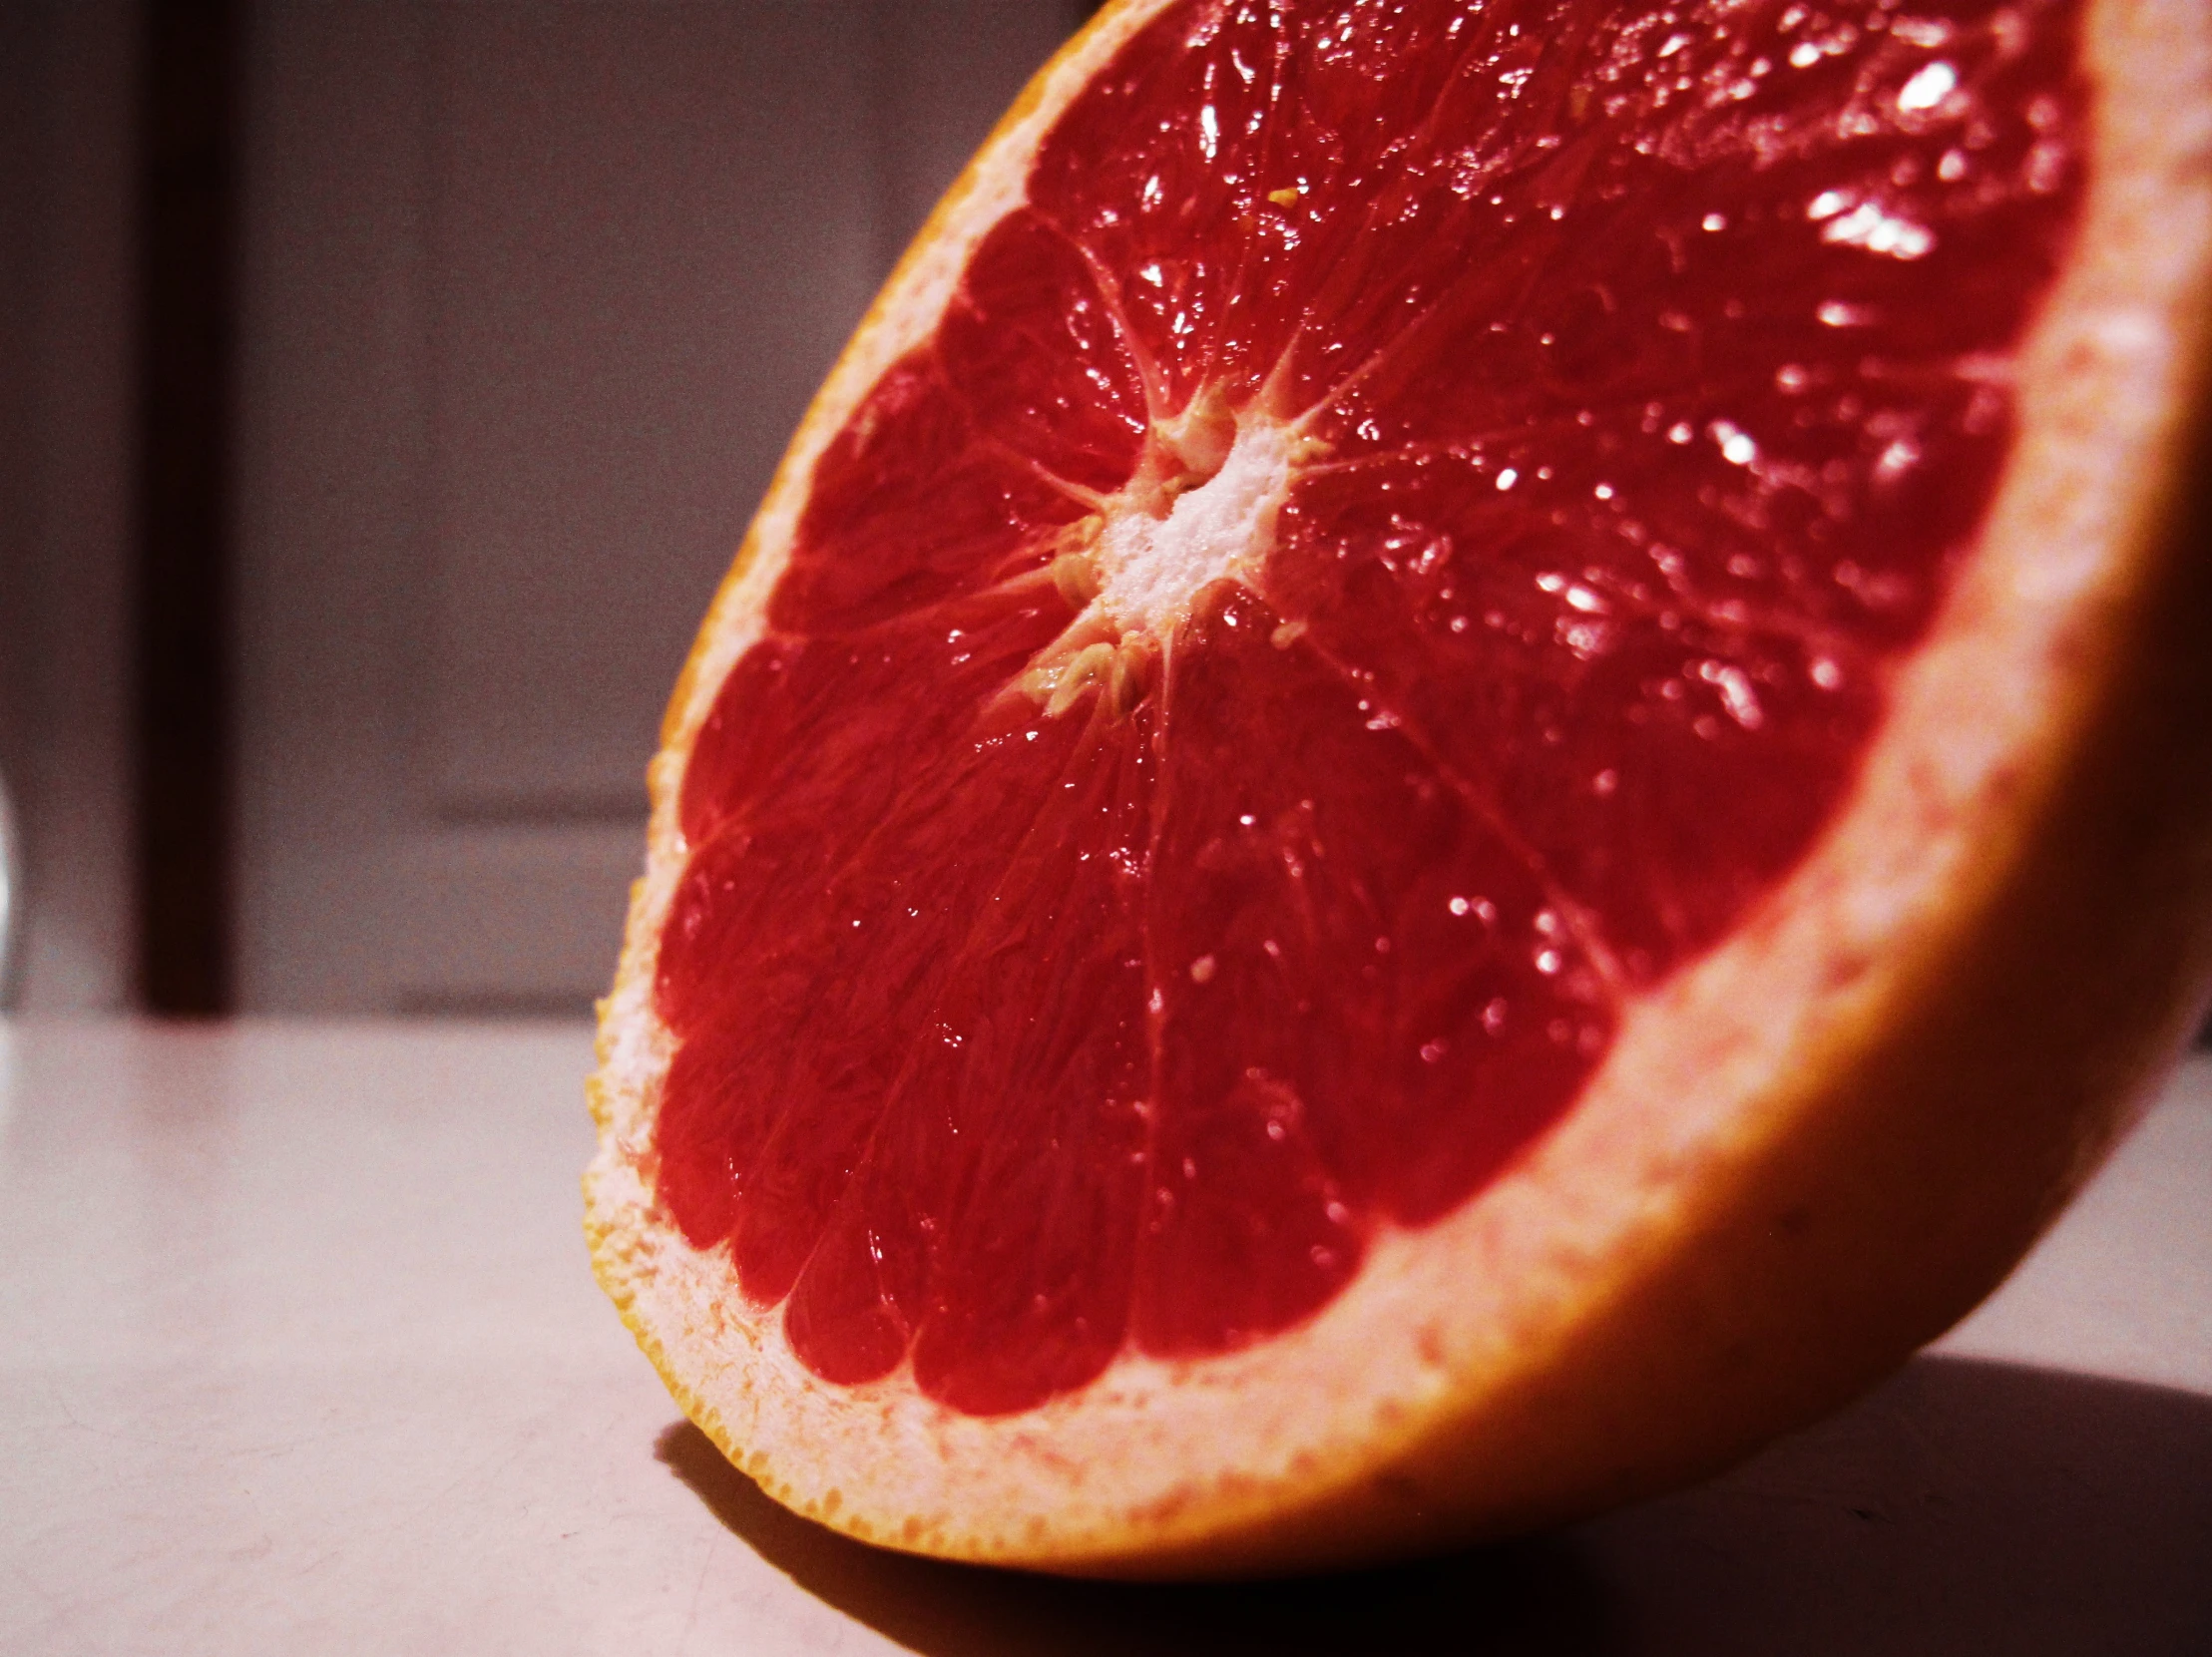 a red gfruit cut in half sitting on a table